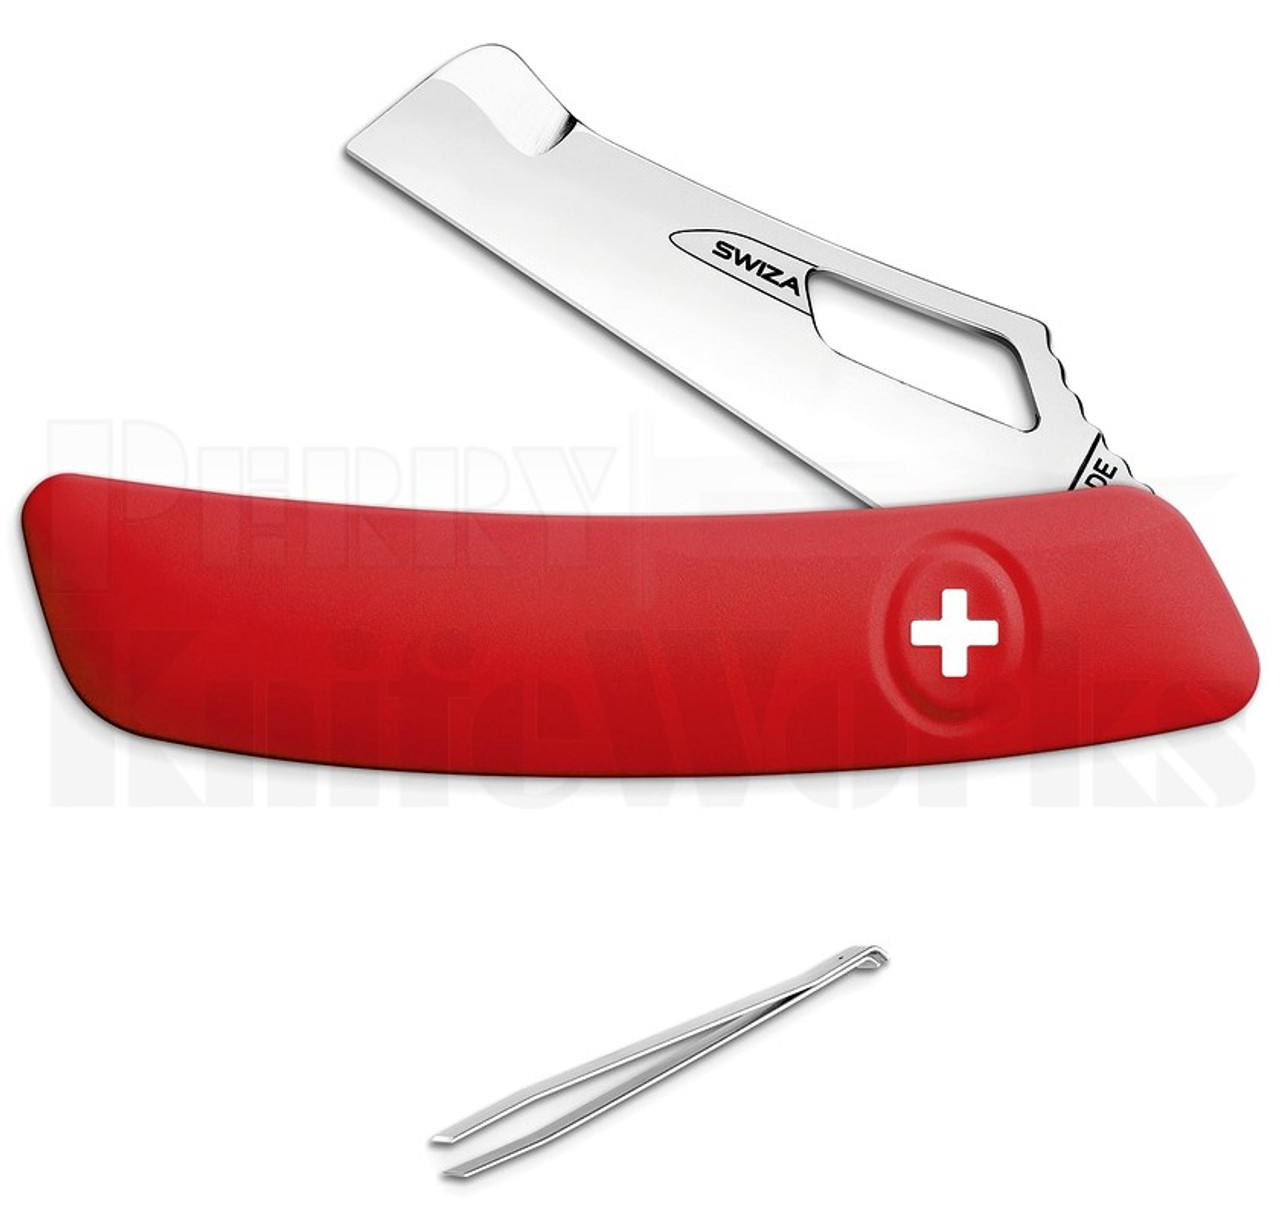 Swiza GS00 Garden Grafting Swiss Pocket Knife Red l For Sale